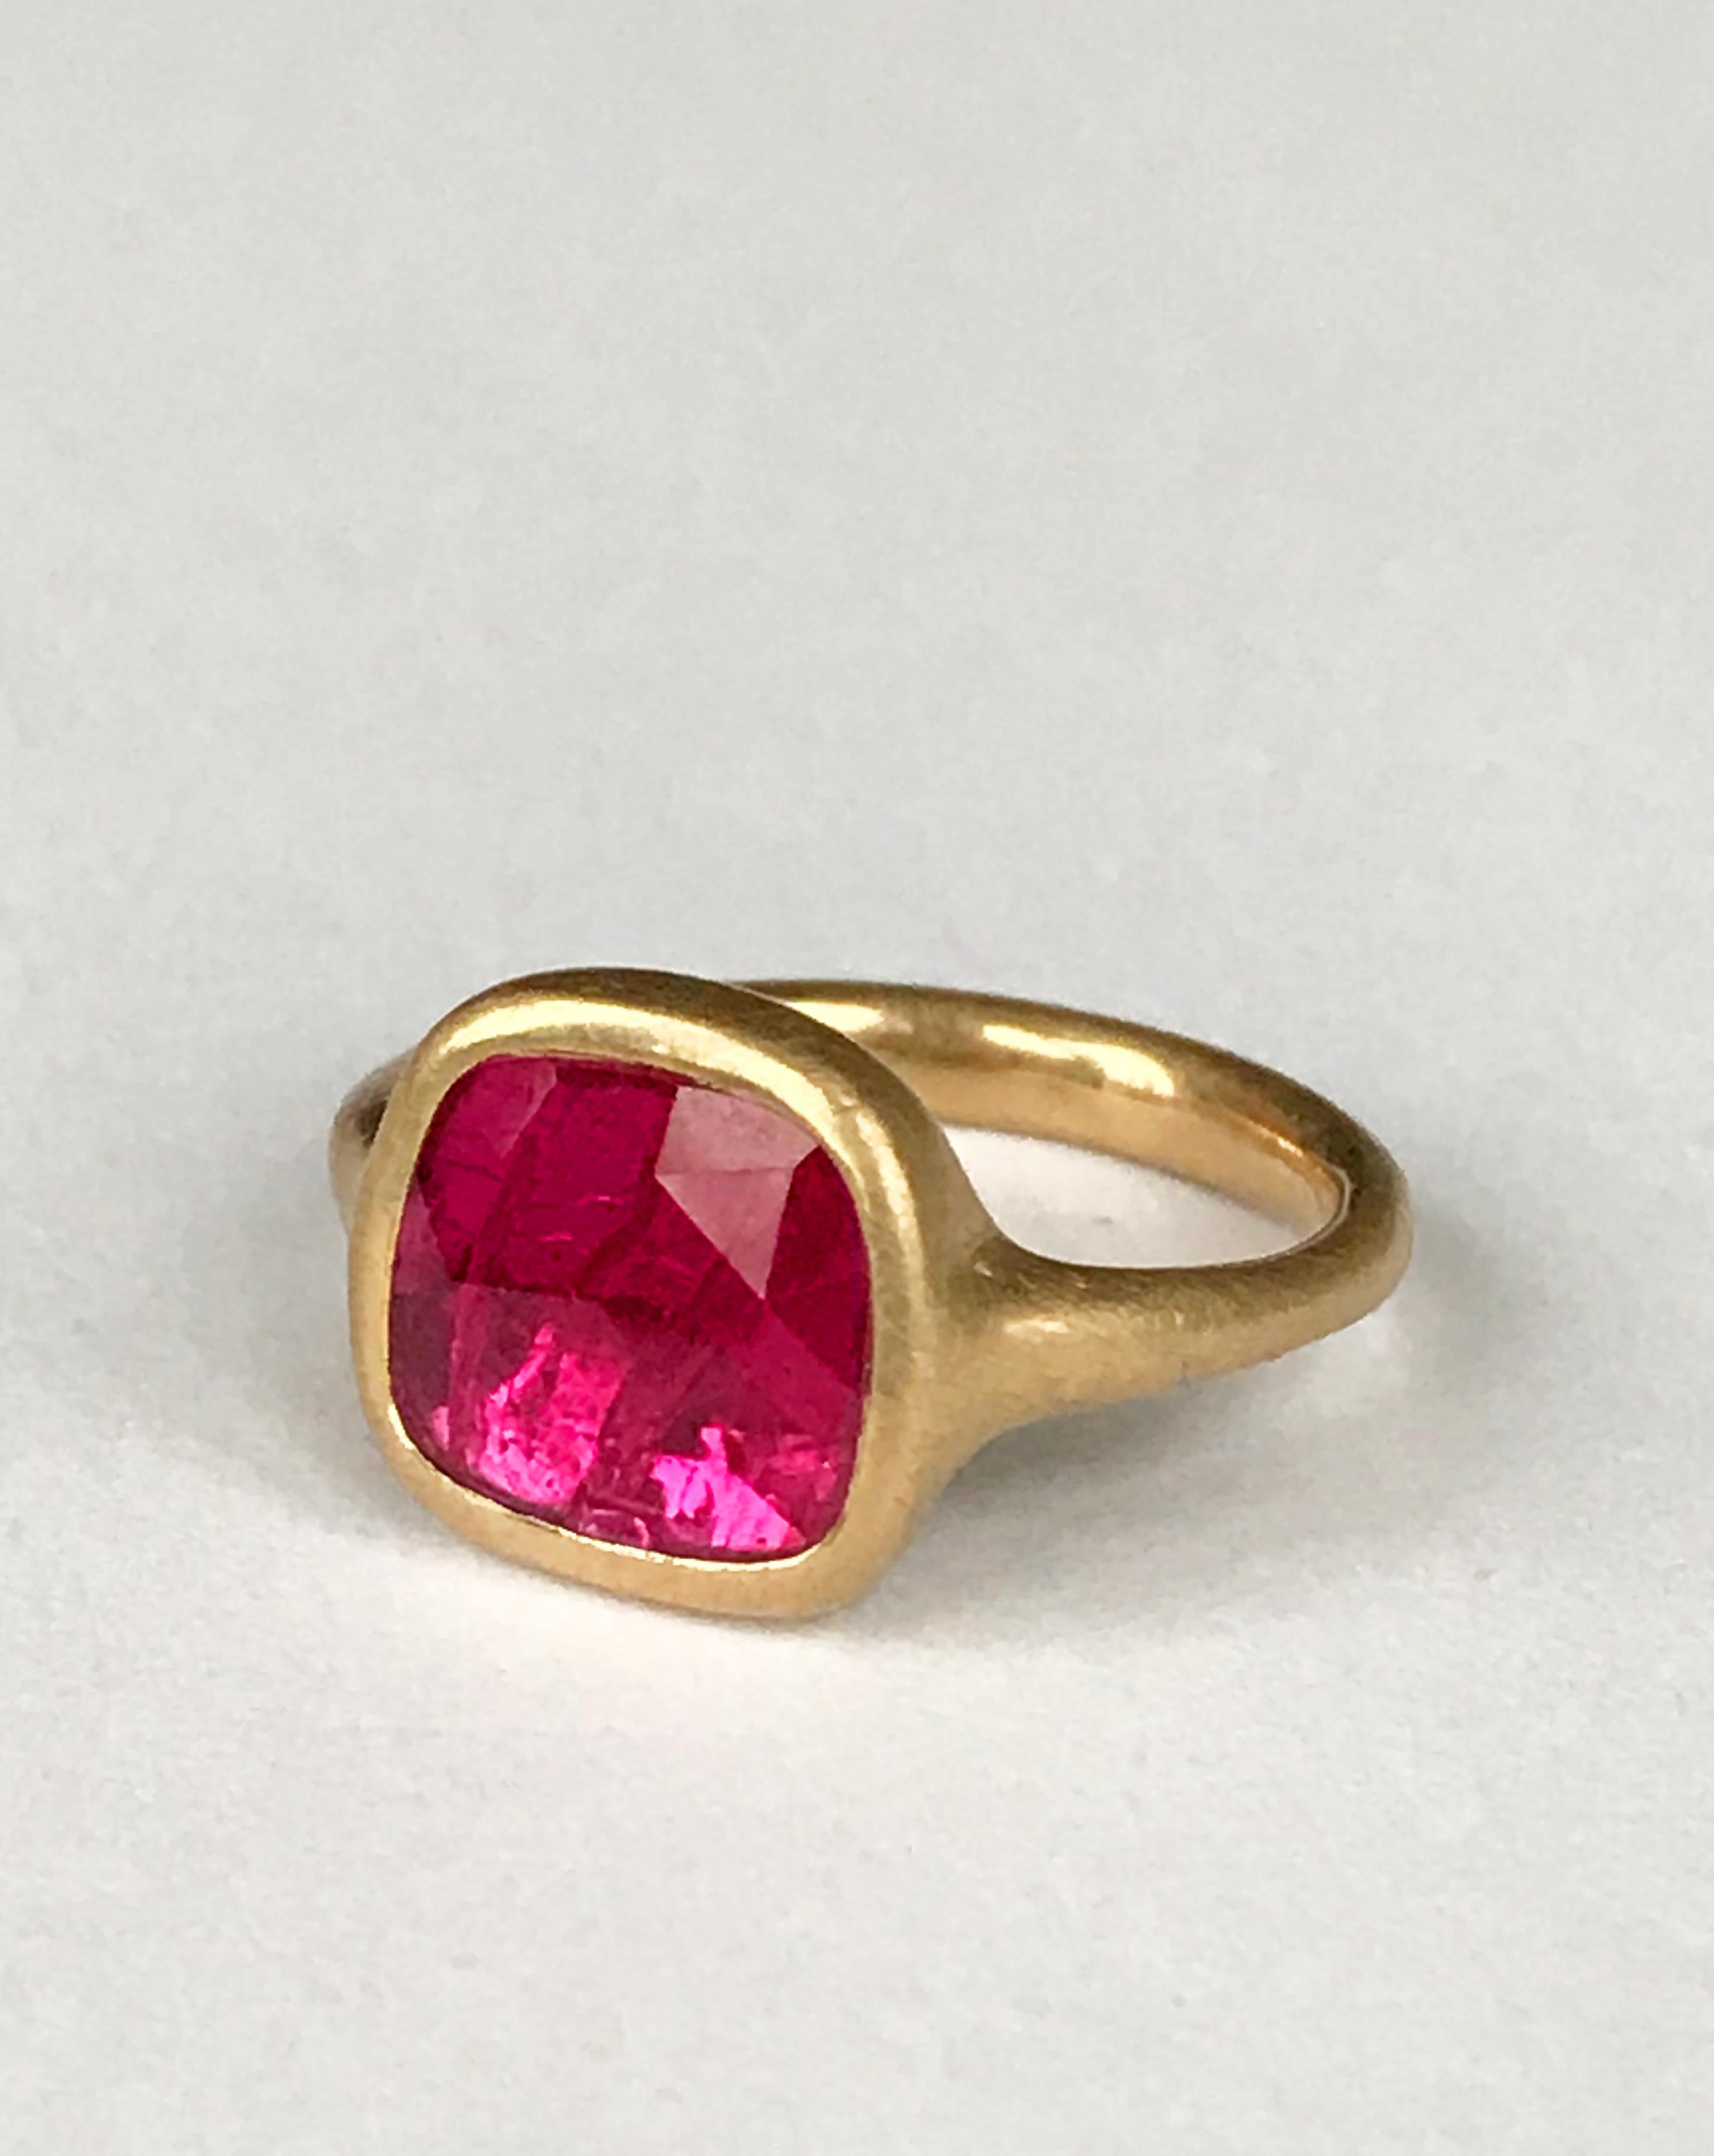 Dalben design One of a Kind 18k yellow gold matte finishing ring with a 1,69 carat bezel-set square shape rose cut slice ruby. 
Ring size 7 USA - EU 55 re-sizable to most finger sizes. 
Bezel stone dimensions :
height 11,5 mm
width 12,6 mm
The ring